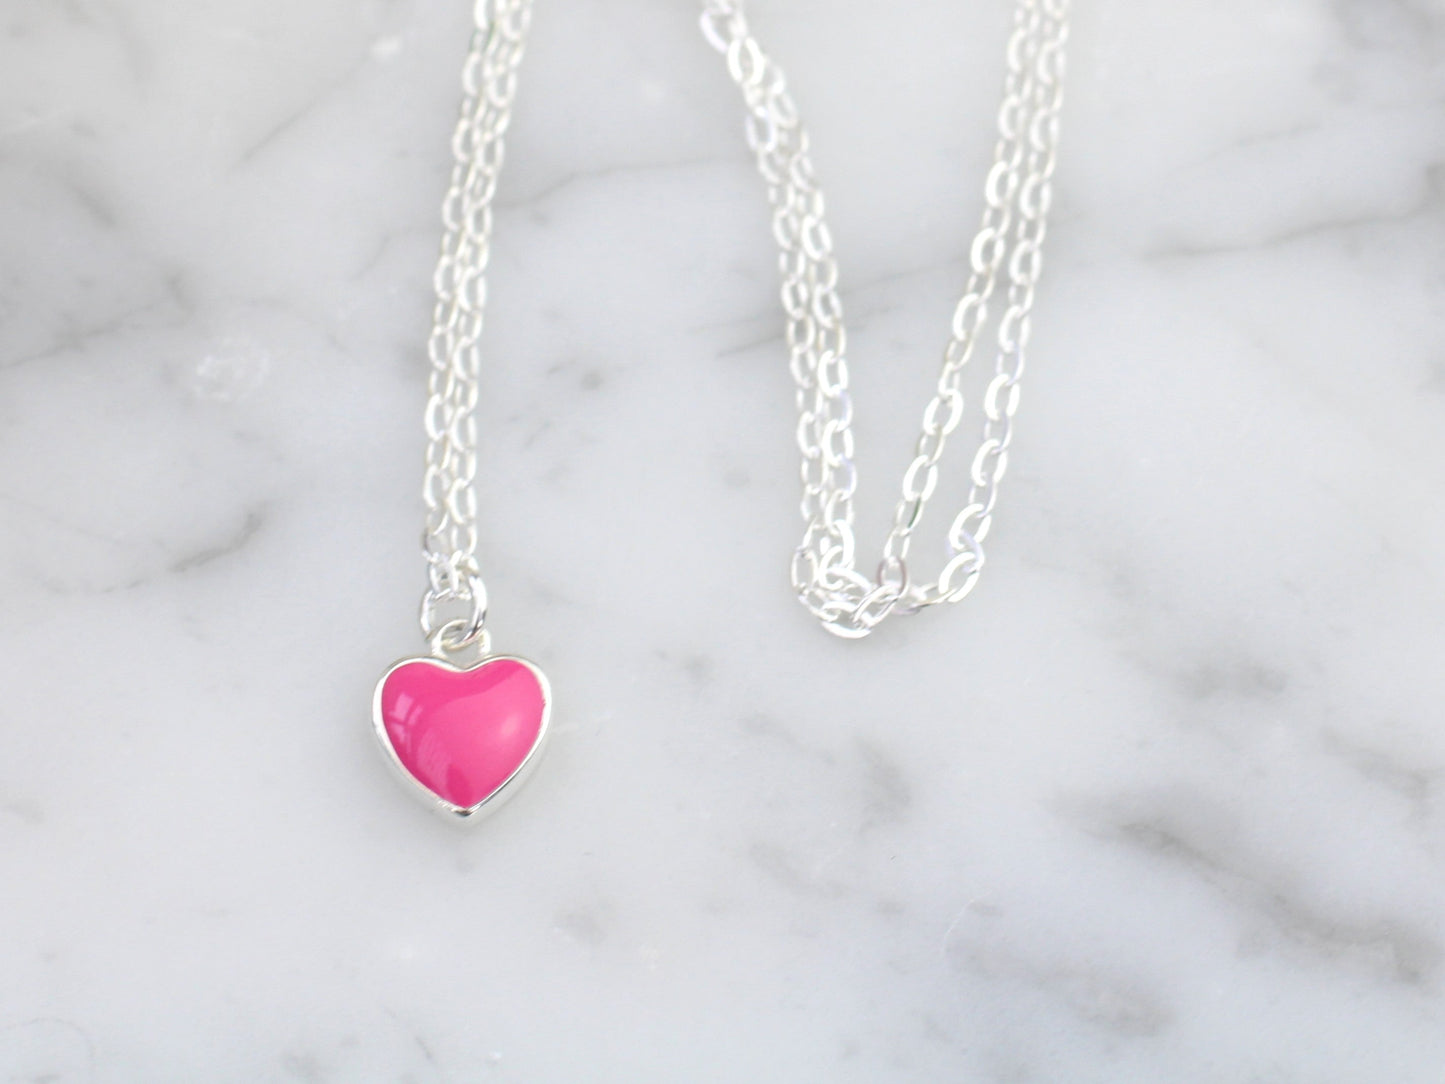 Girlfriend necklace. Pink heart necklace.